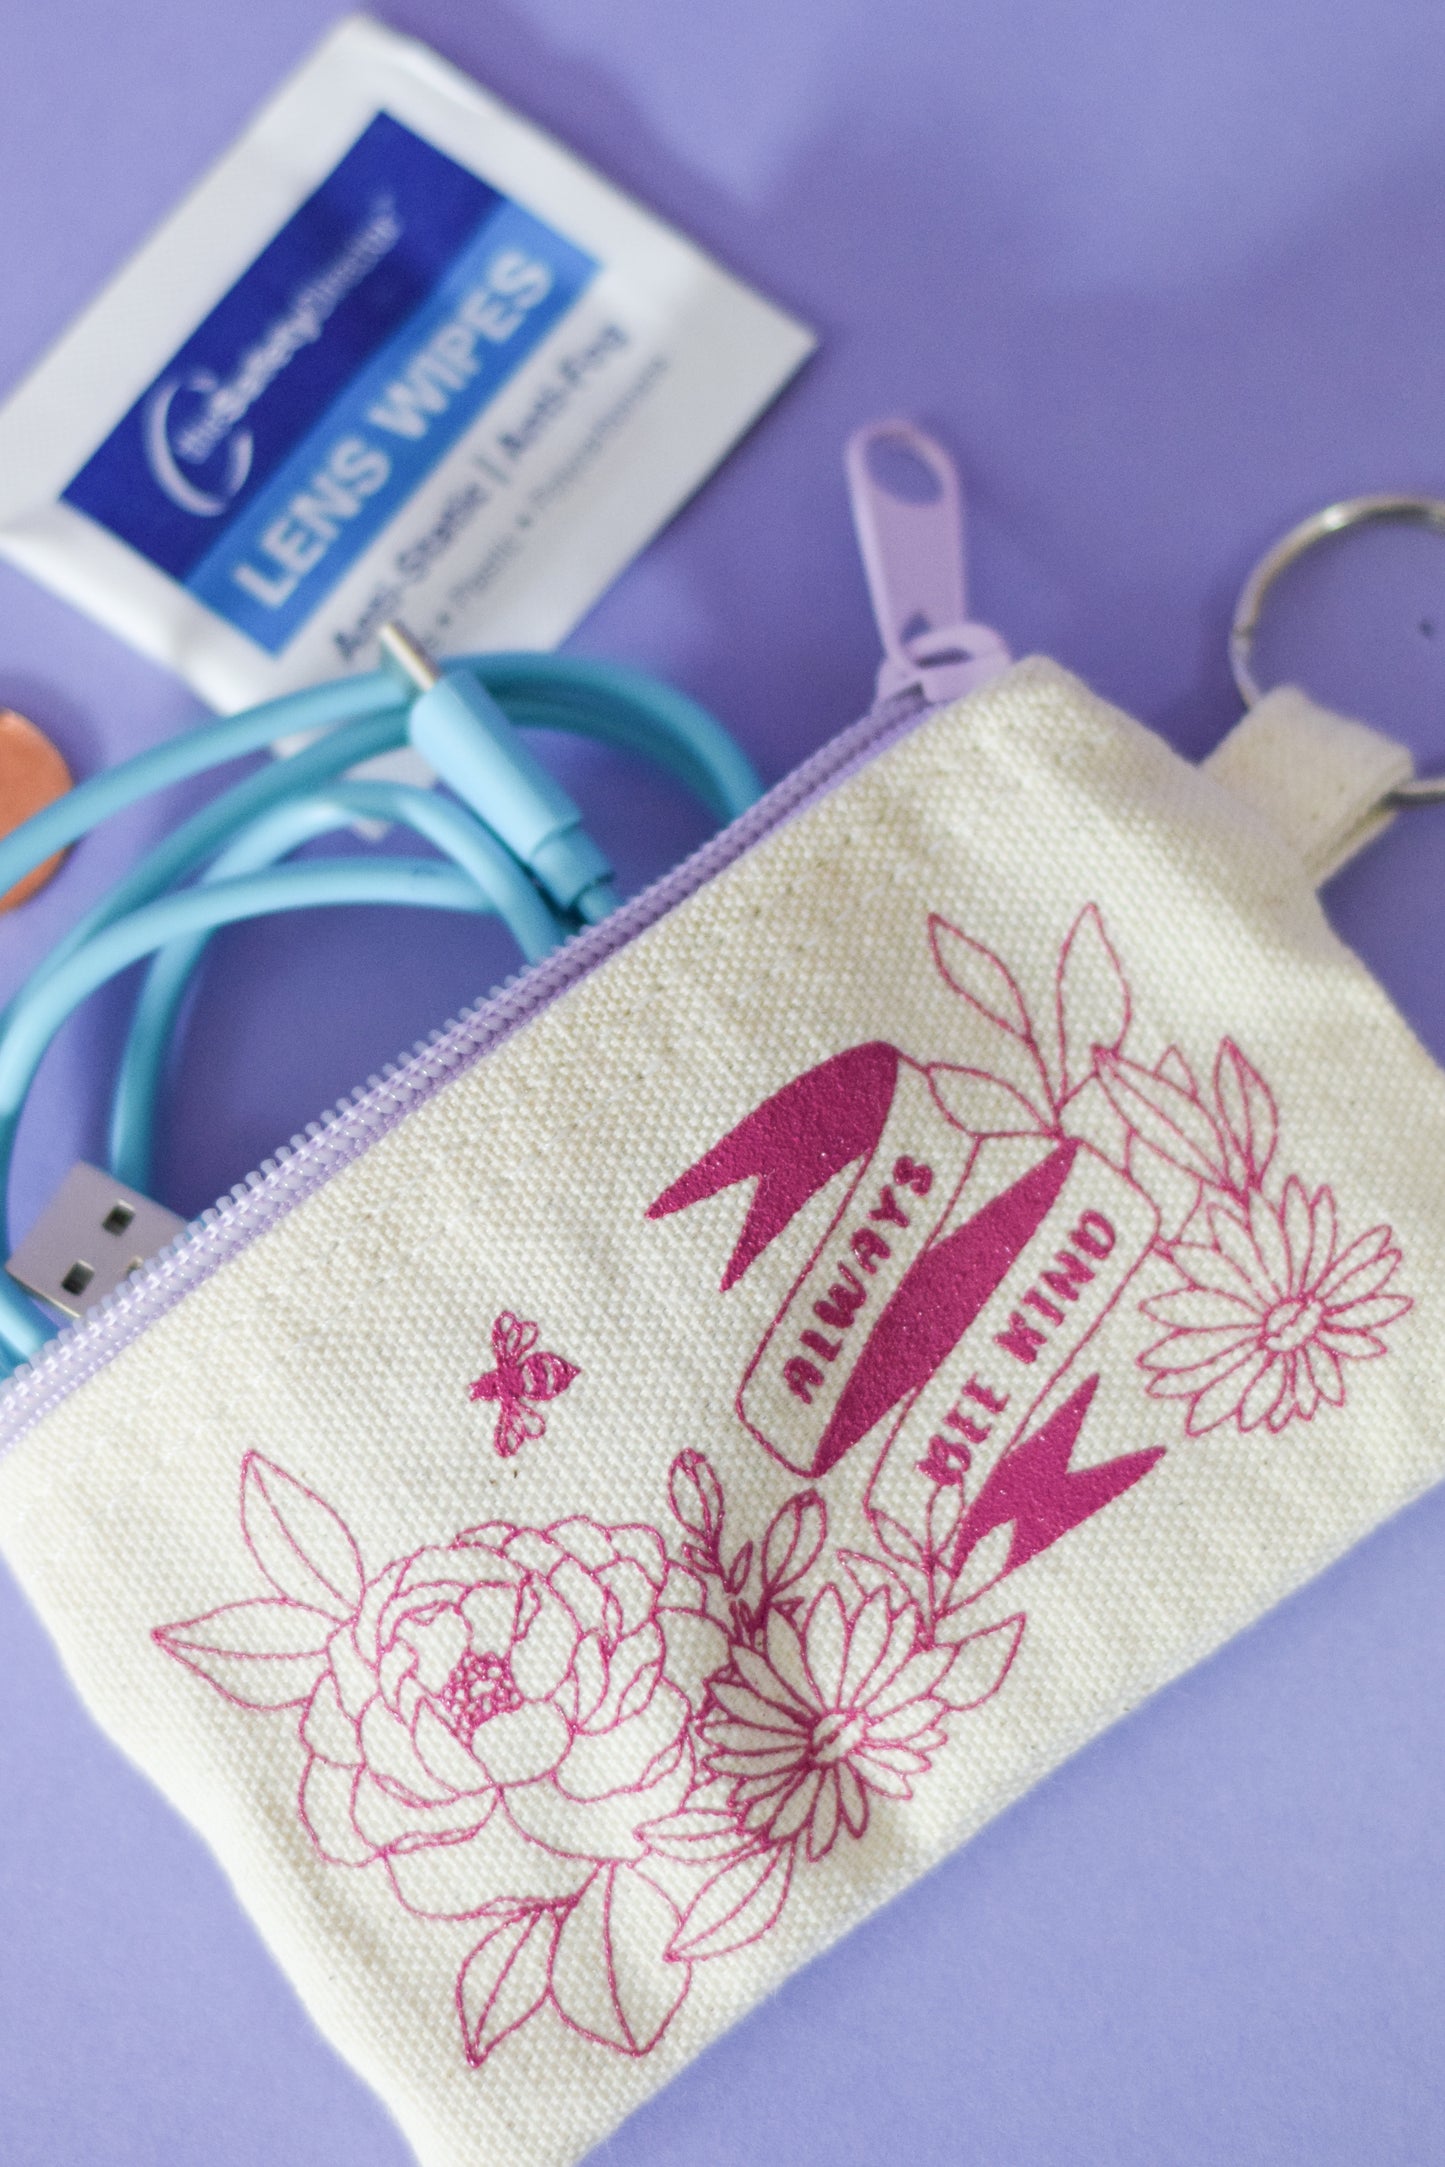 Small white coin purse with purple zipper and magenta flowers with lettering “BE KIND”  with key ring on side